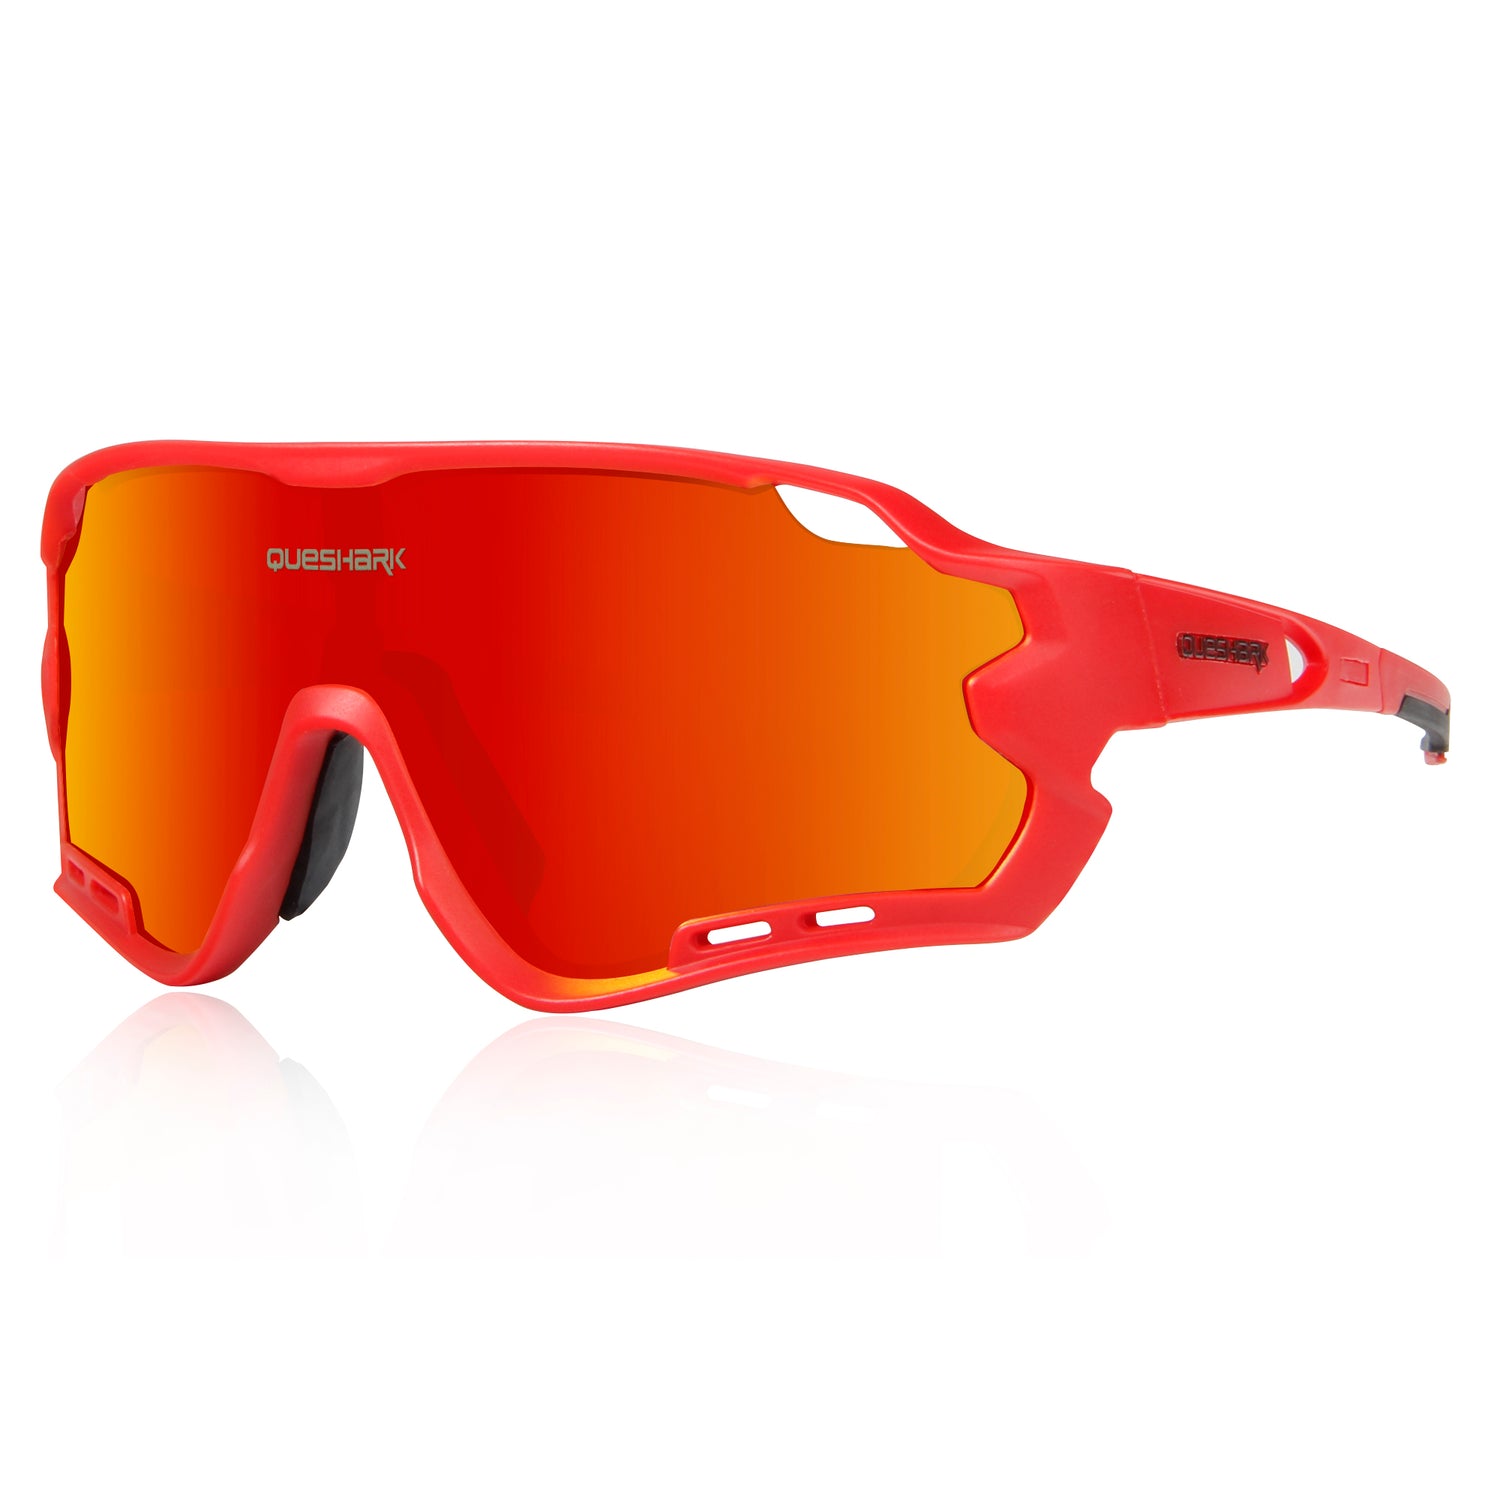 Queshark Outdoor Sports Cycling Glasses Polarized For Men Women 4